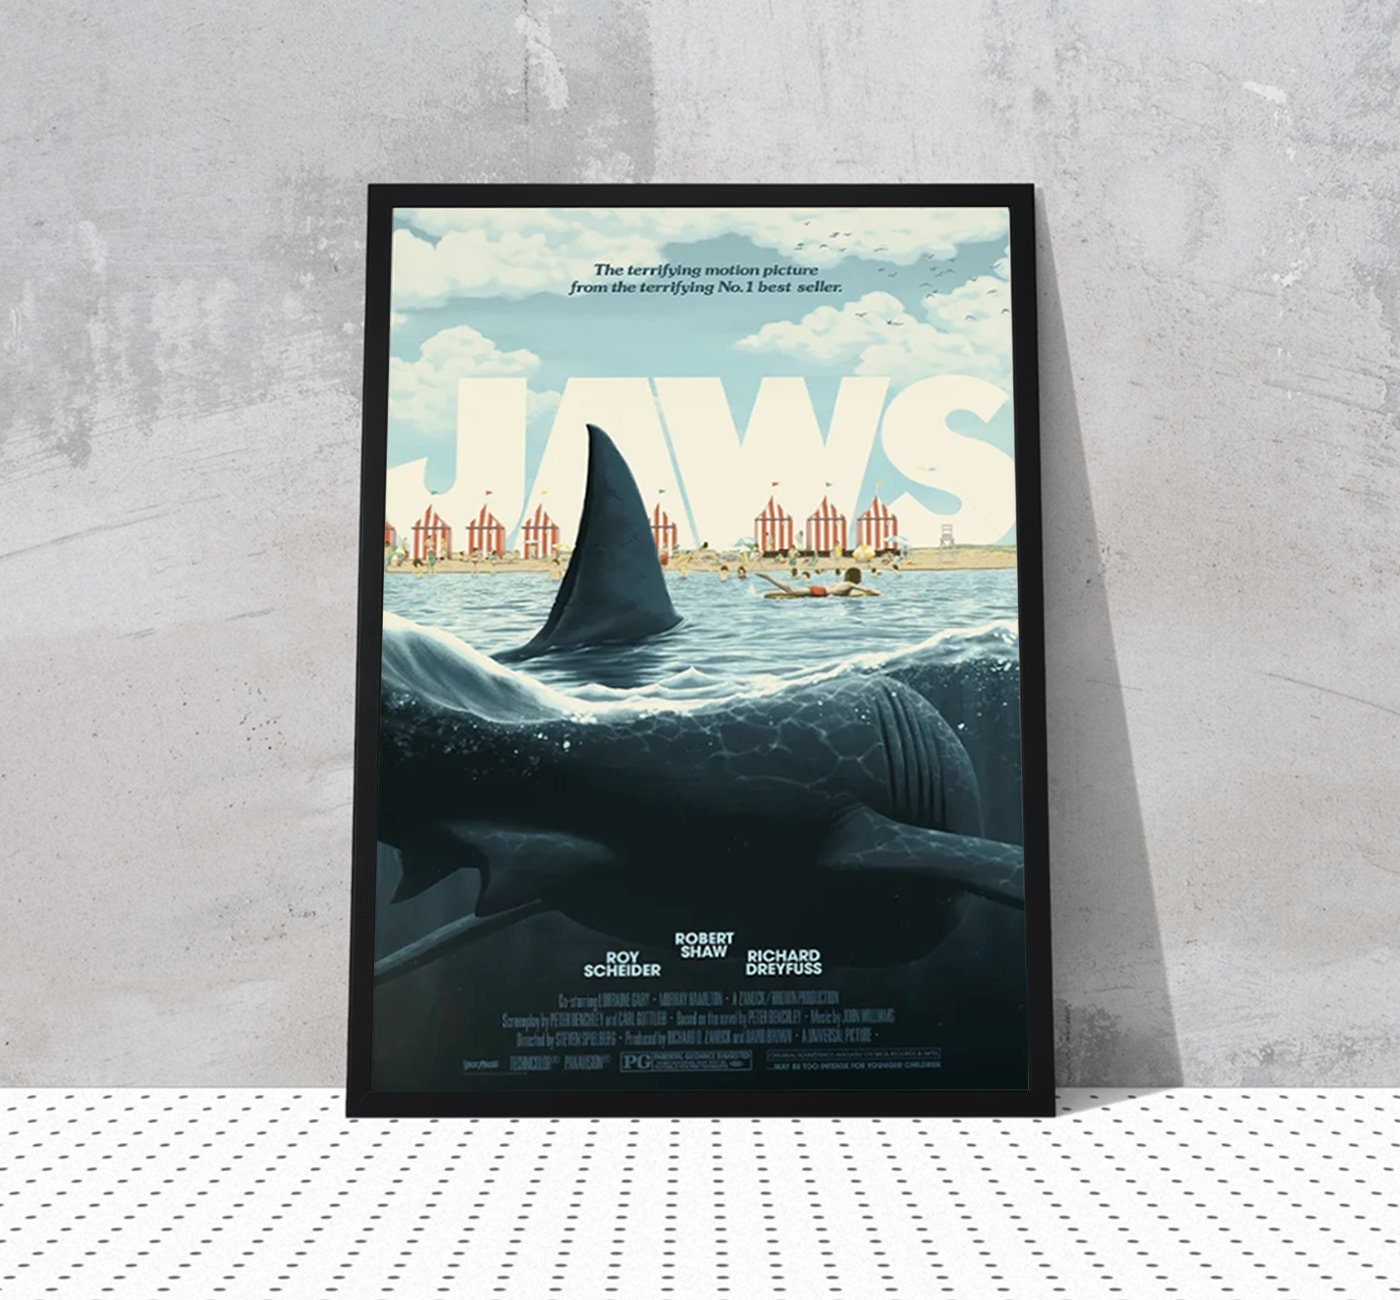 Discover Jaws 1975 movie poster, Blockbuster movie Premium Matte Vertical Poster